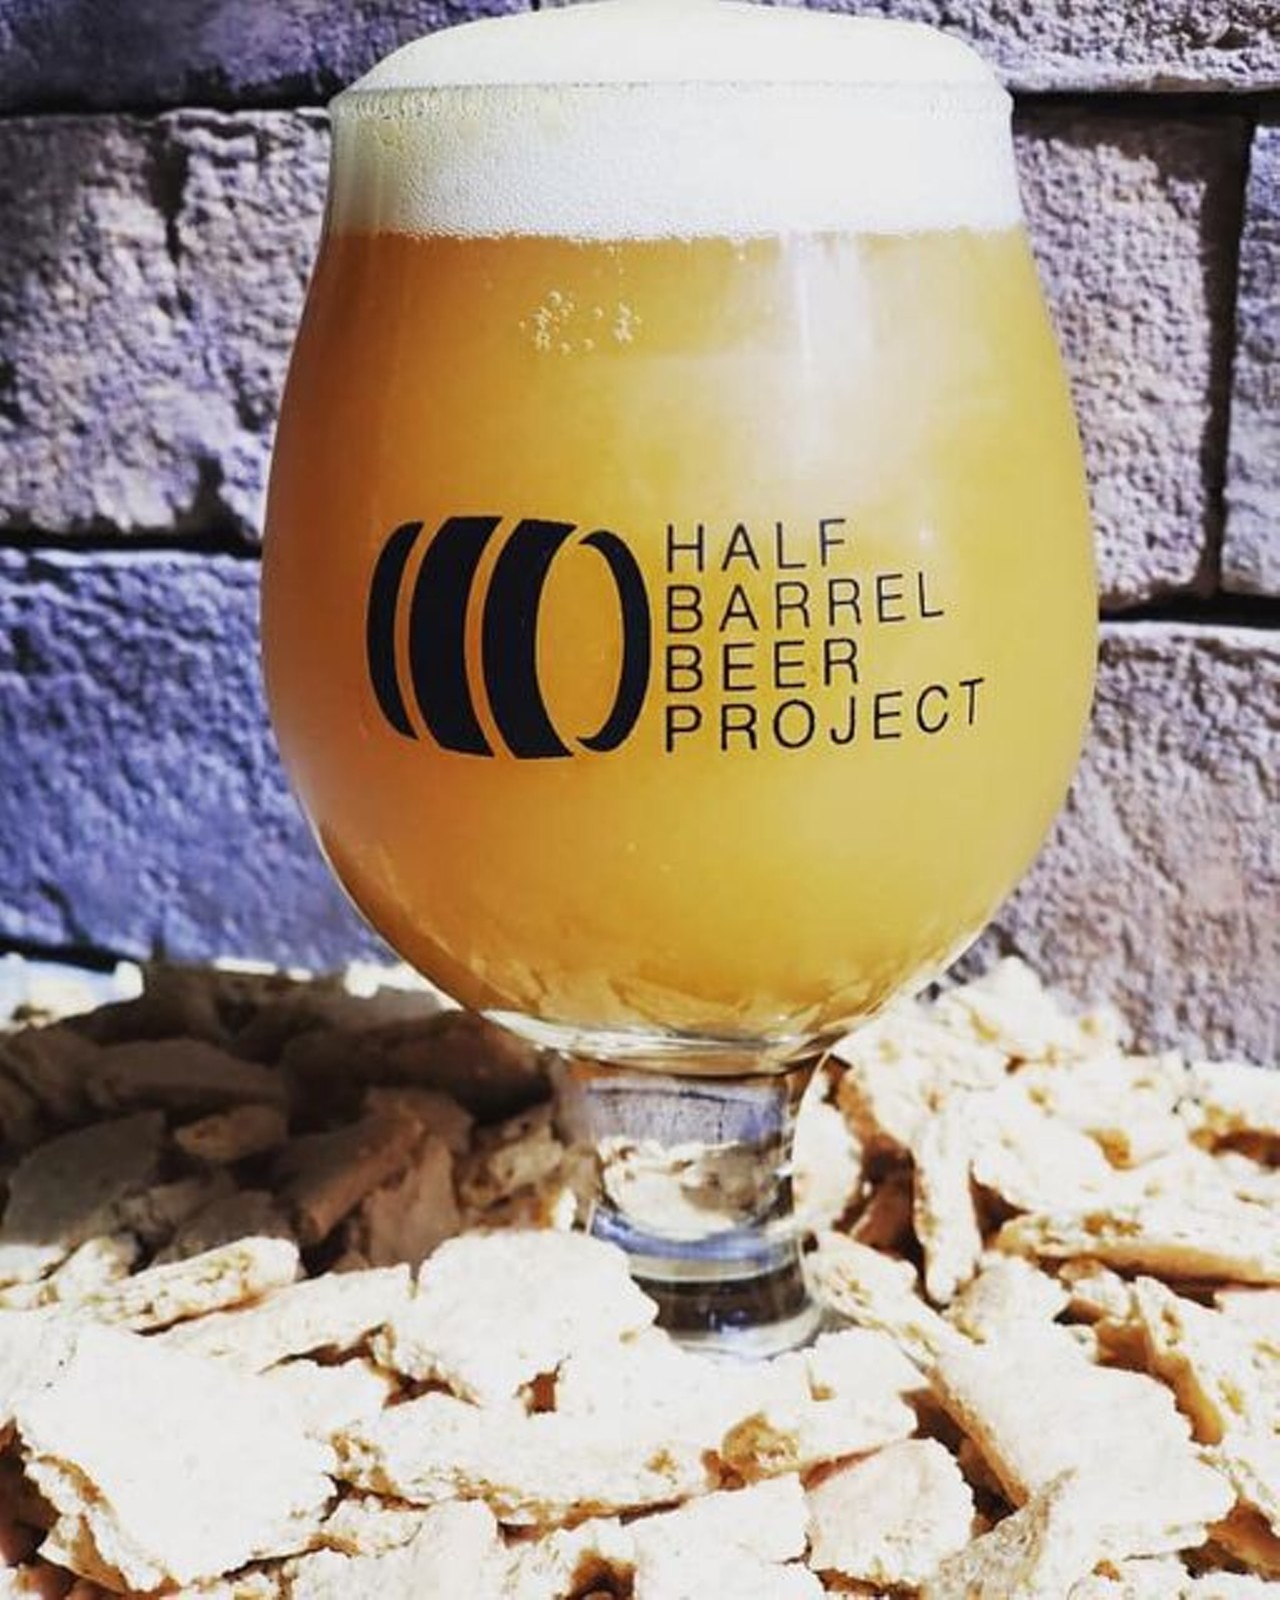 Half Barrel Beer Project 
9650 Universal Blvd. #143
Half Barrel Beer released a peach pie gobbler made with 40 pounds of peaches, marshmallow and pie crust. Thanks to their half-barrel system, they&#146;re able to create these kinds of innovative and unique recipes. 
Photo via Half Barrel Beer Project/Facebook